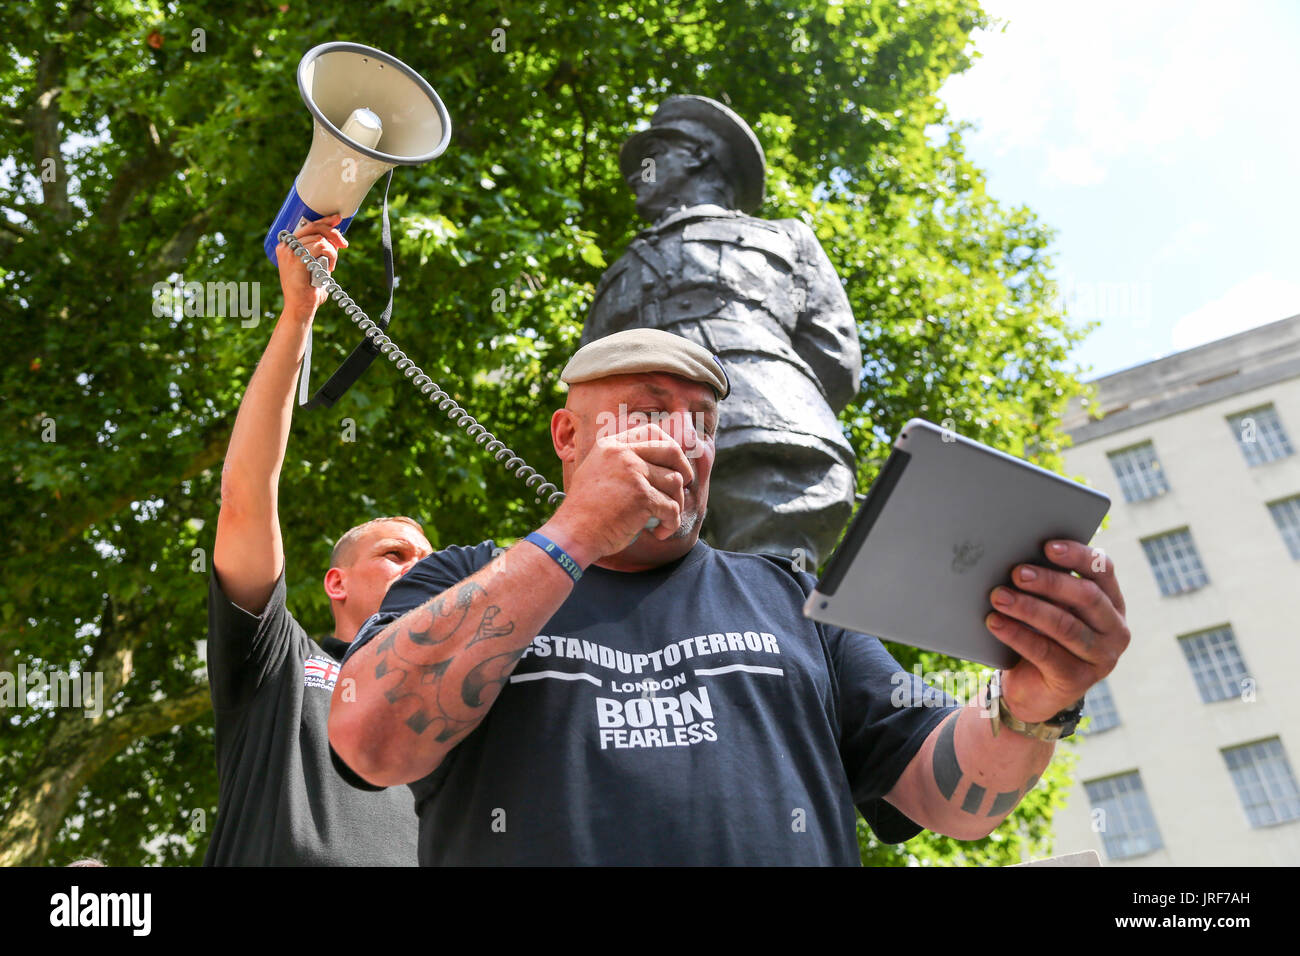 London, UK. 5th Aug, 2017. Veterans Against Terrorism group take a petition to Downing Street asking the British government to take firmer action against the 3,000 suspected Muslim extremists living in Britain. The group marched from Parliament Square to outside Downing Street.. Penelope Barritt/Alamy Live News Stock Photo